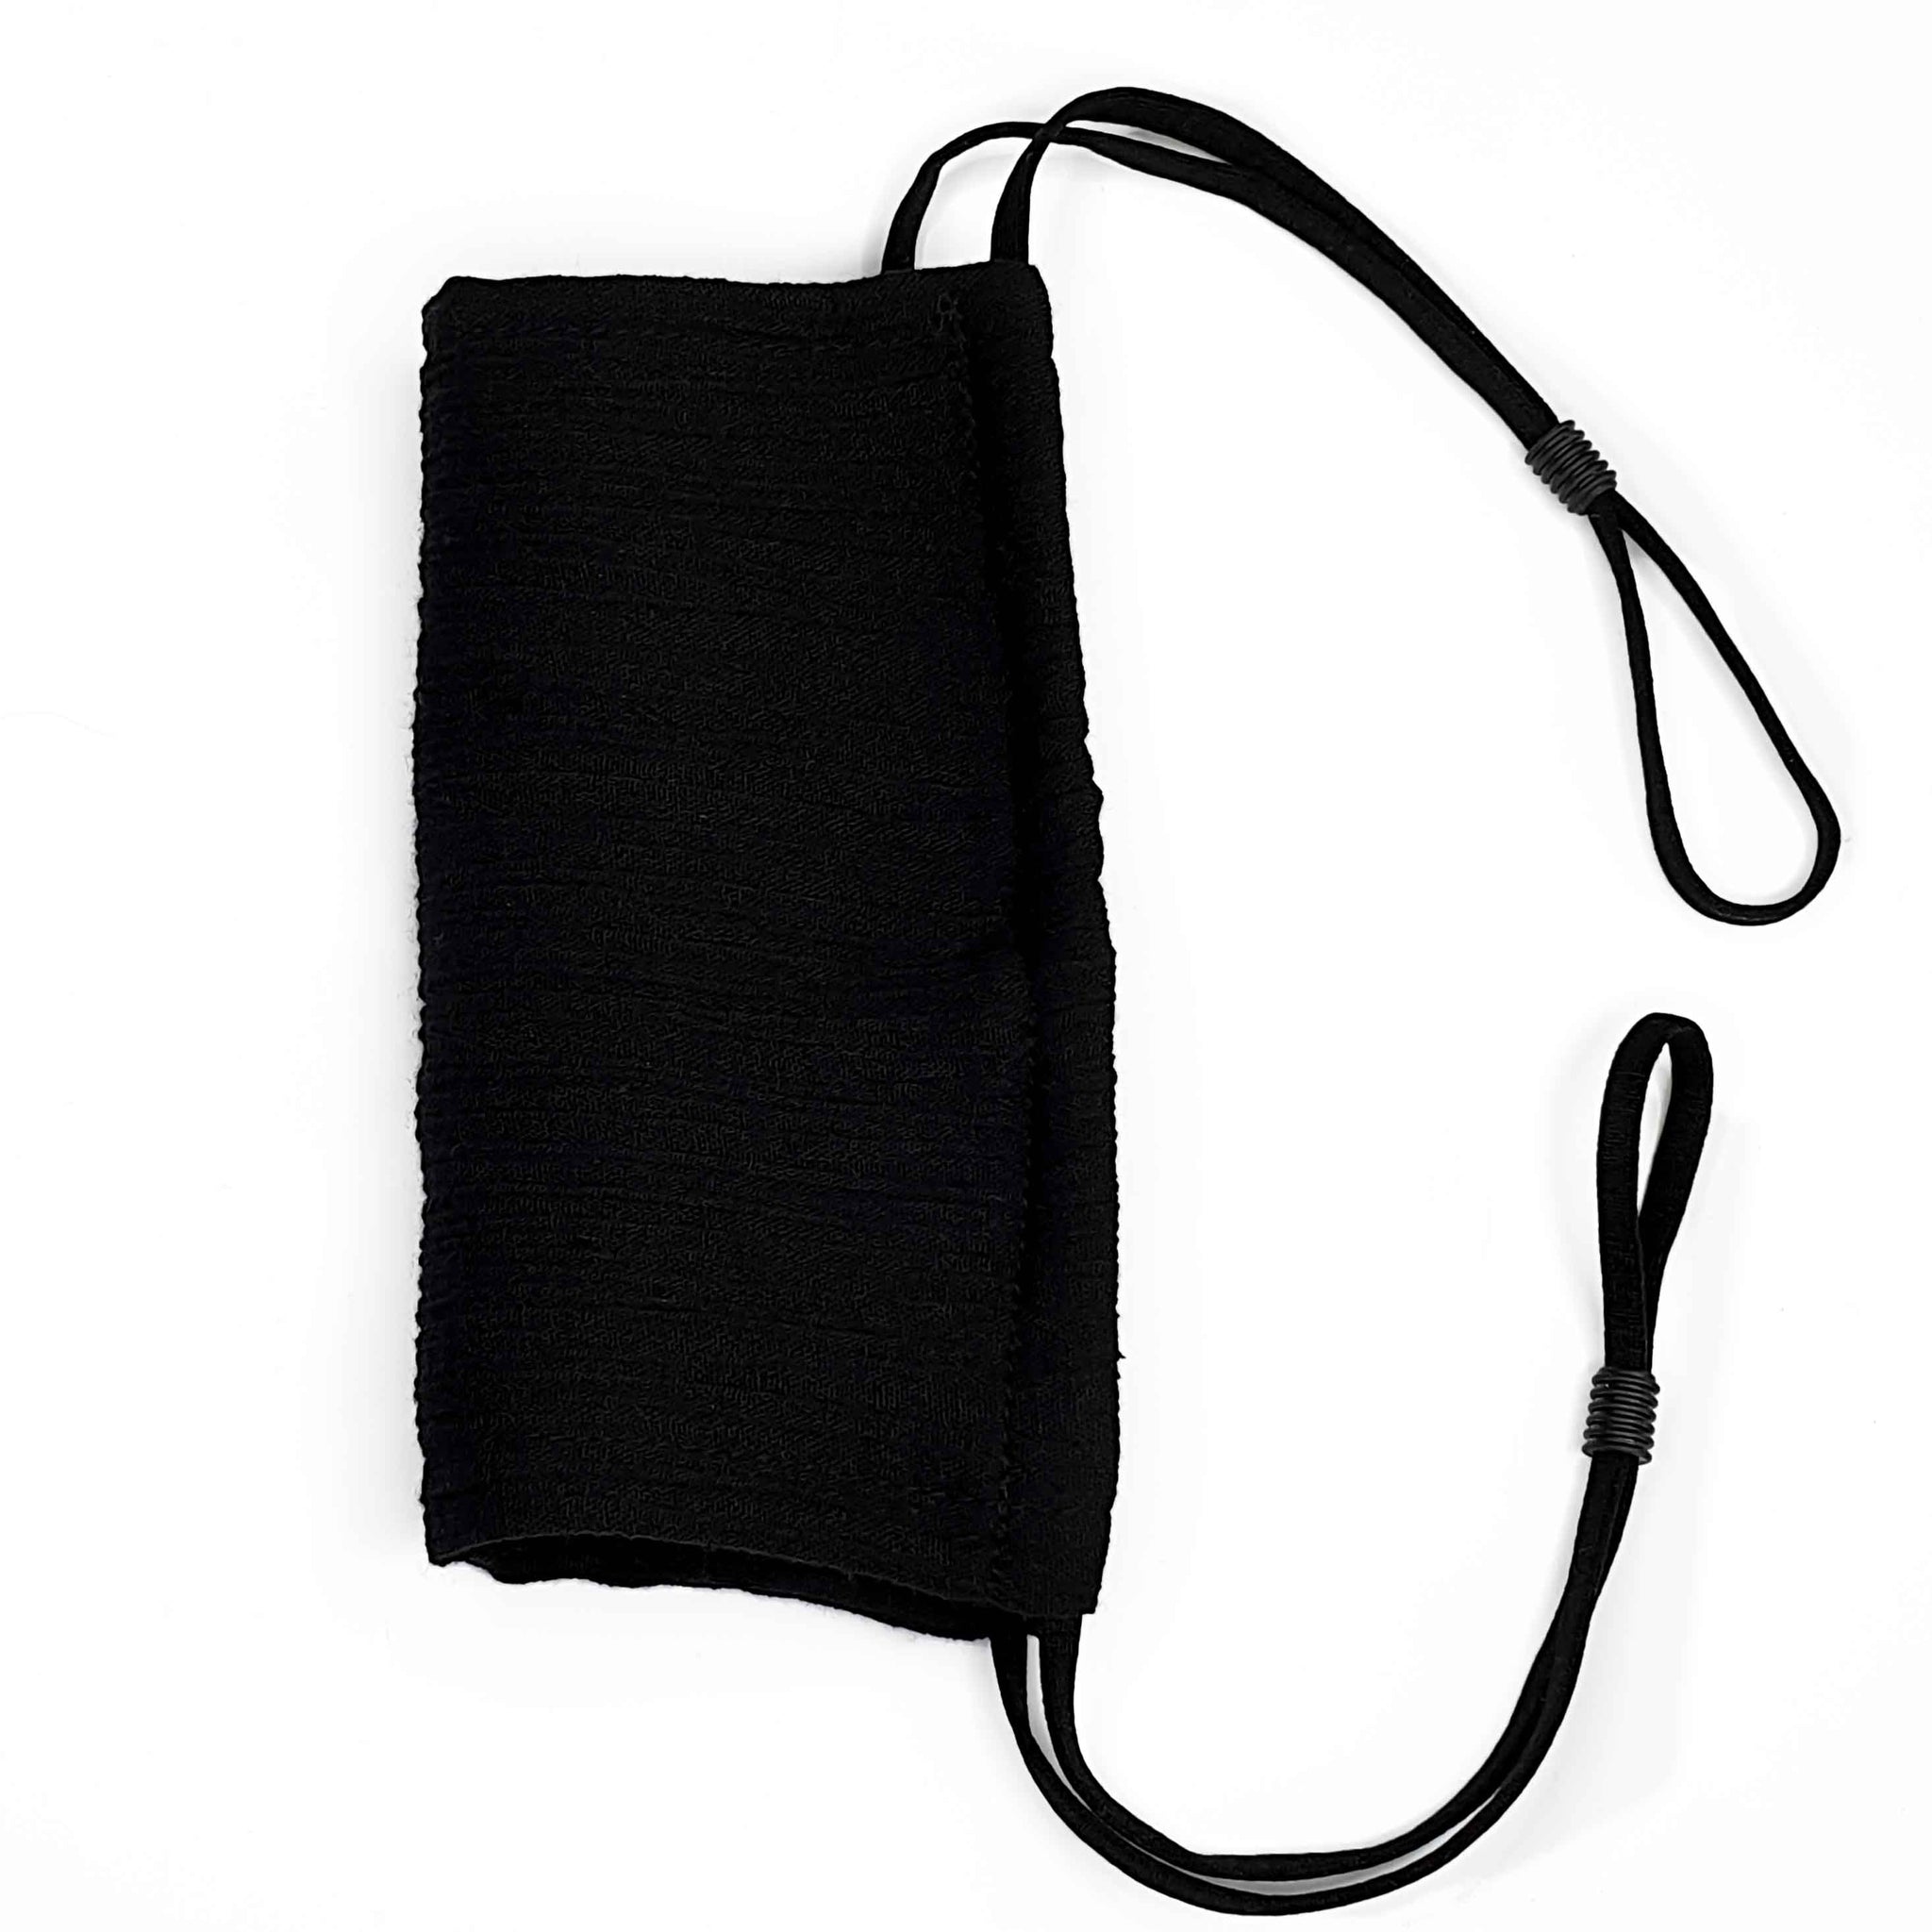 Comfortable BACK TO SCHOOL Mask, 3 Layered Cotton Face Mask - Black